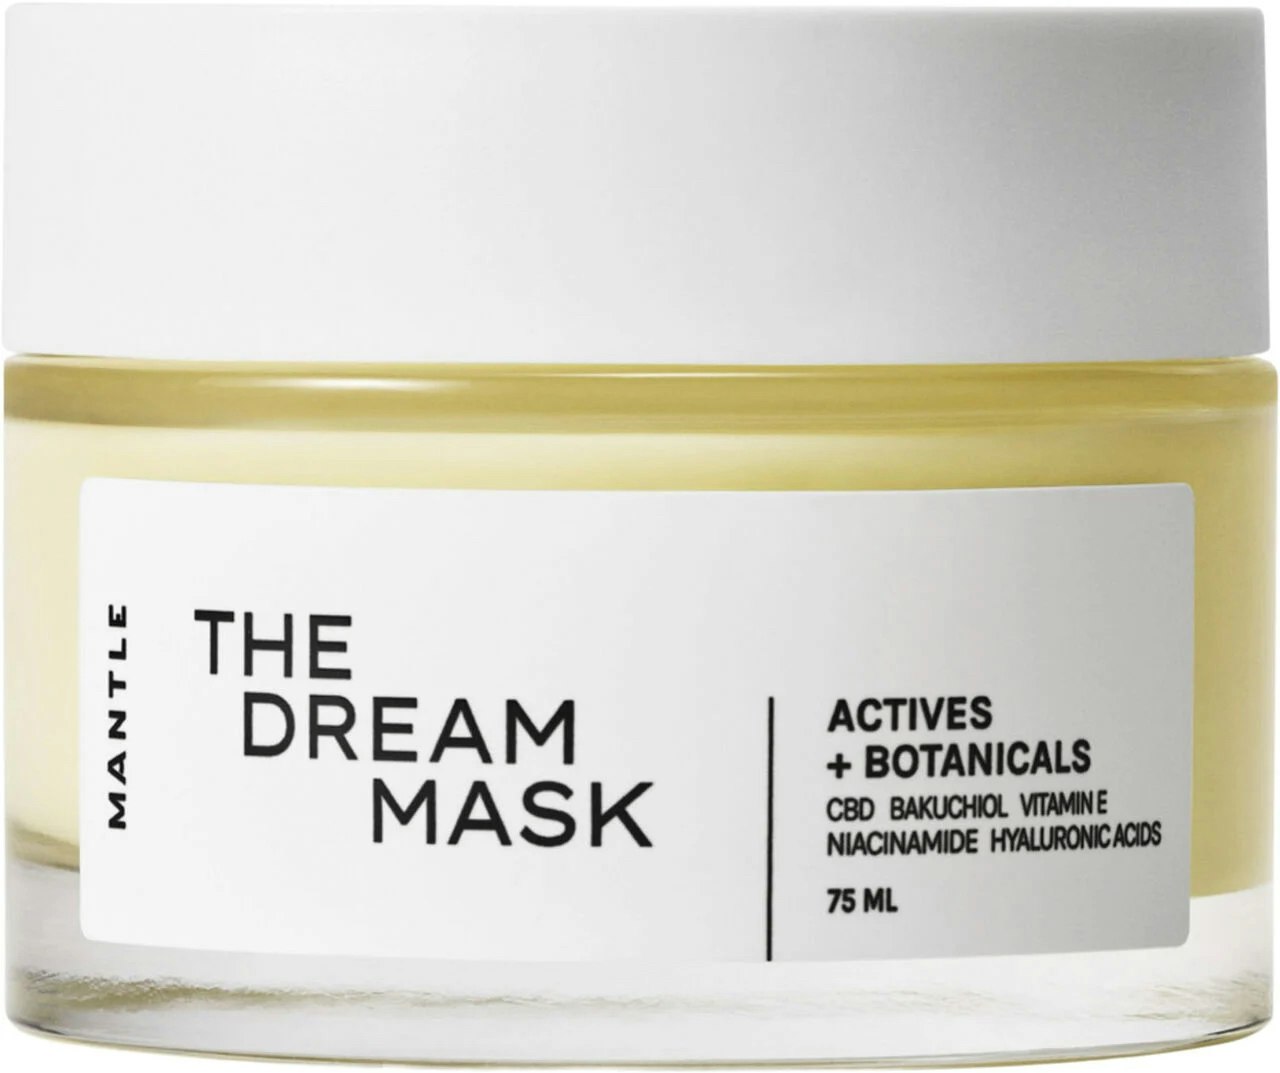 The Dream Mask – Mantle 